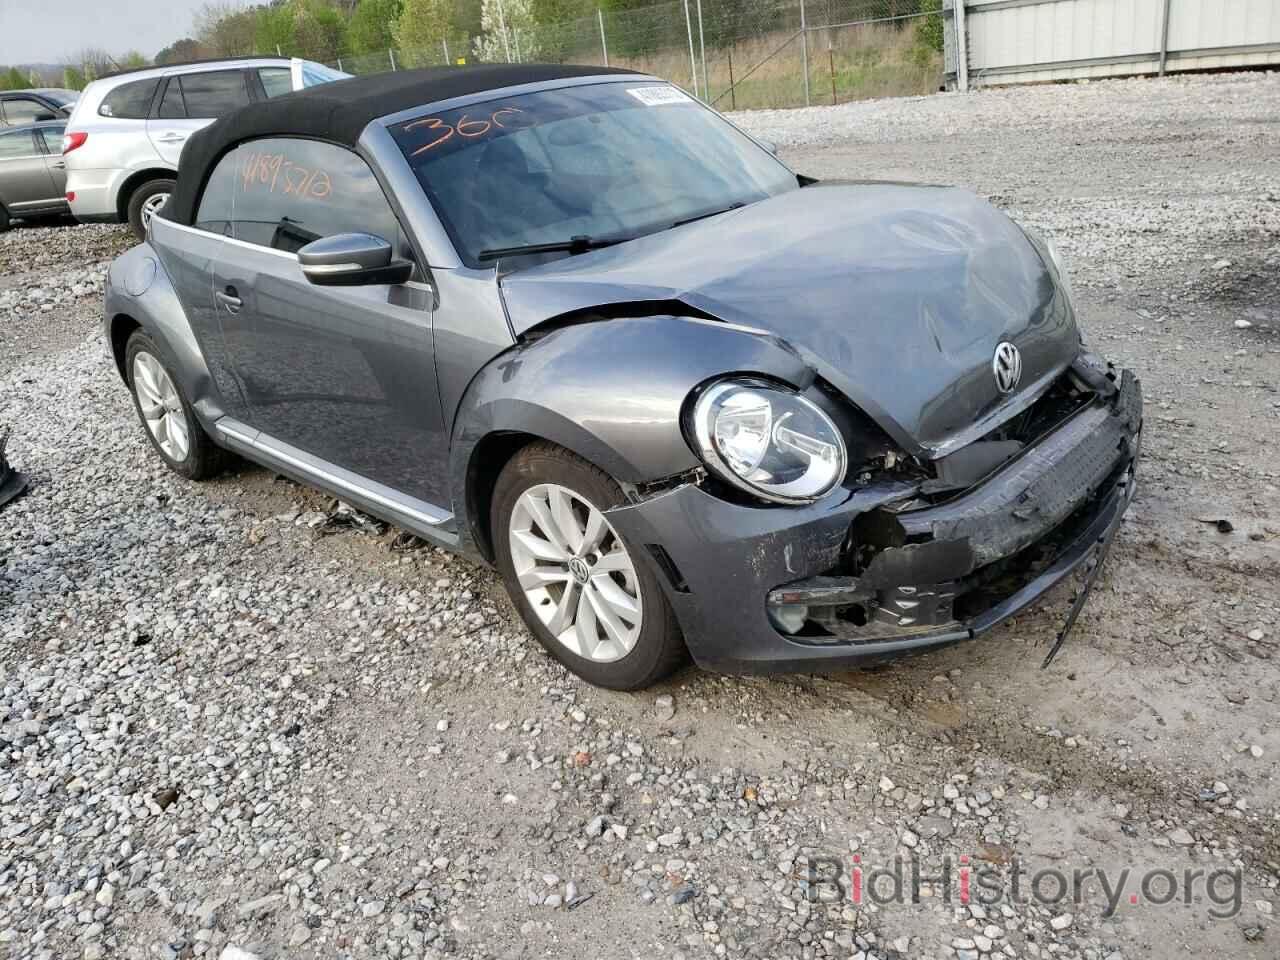 Photo 3VW5A7AT7FM812340 - VOLKSWAGEN BEETLE 2015